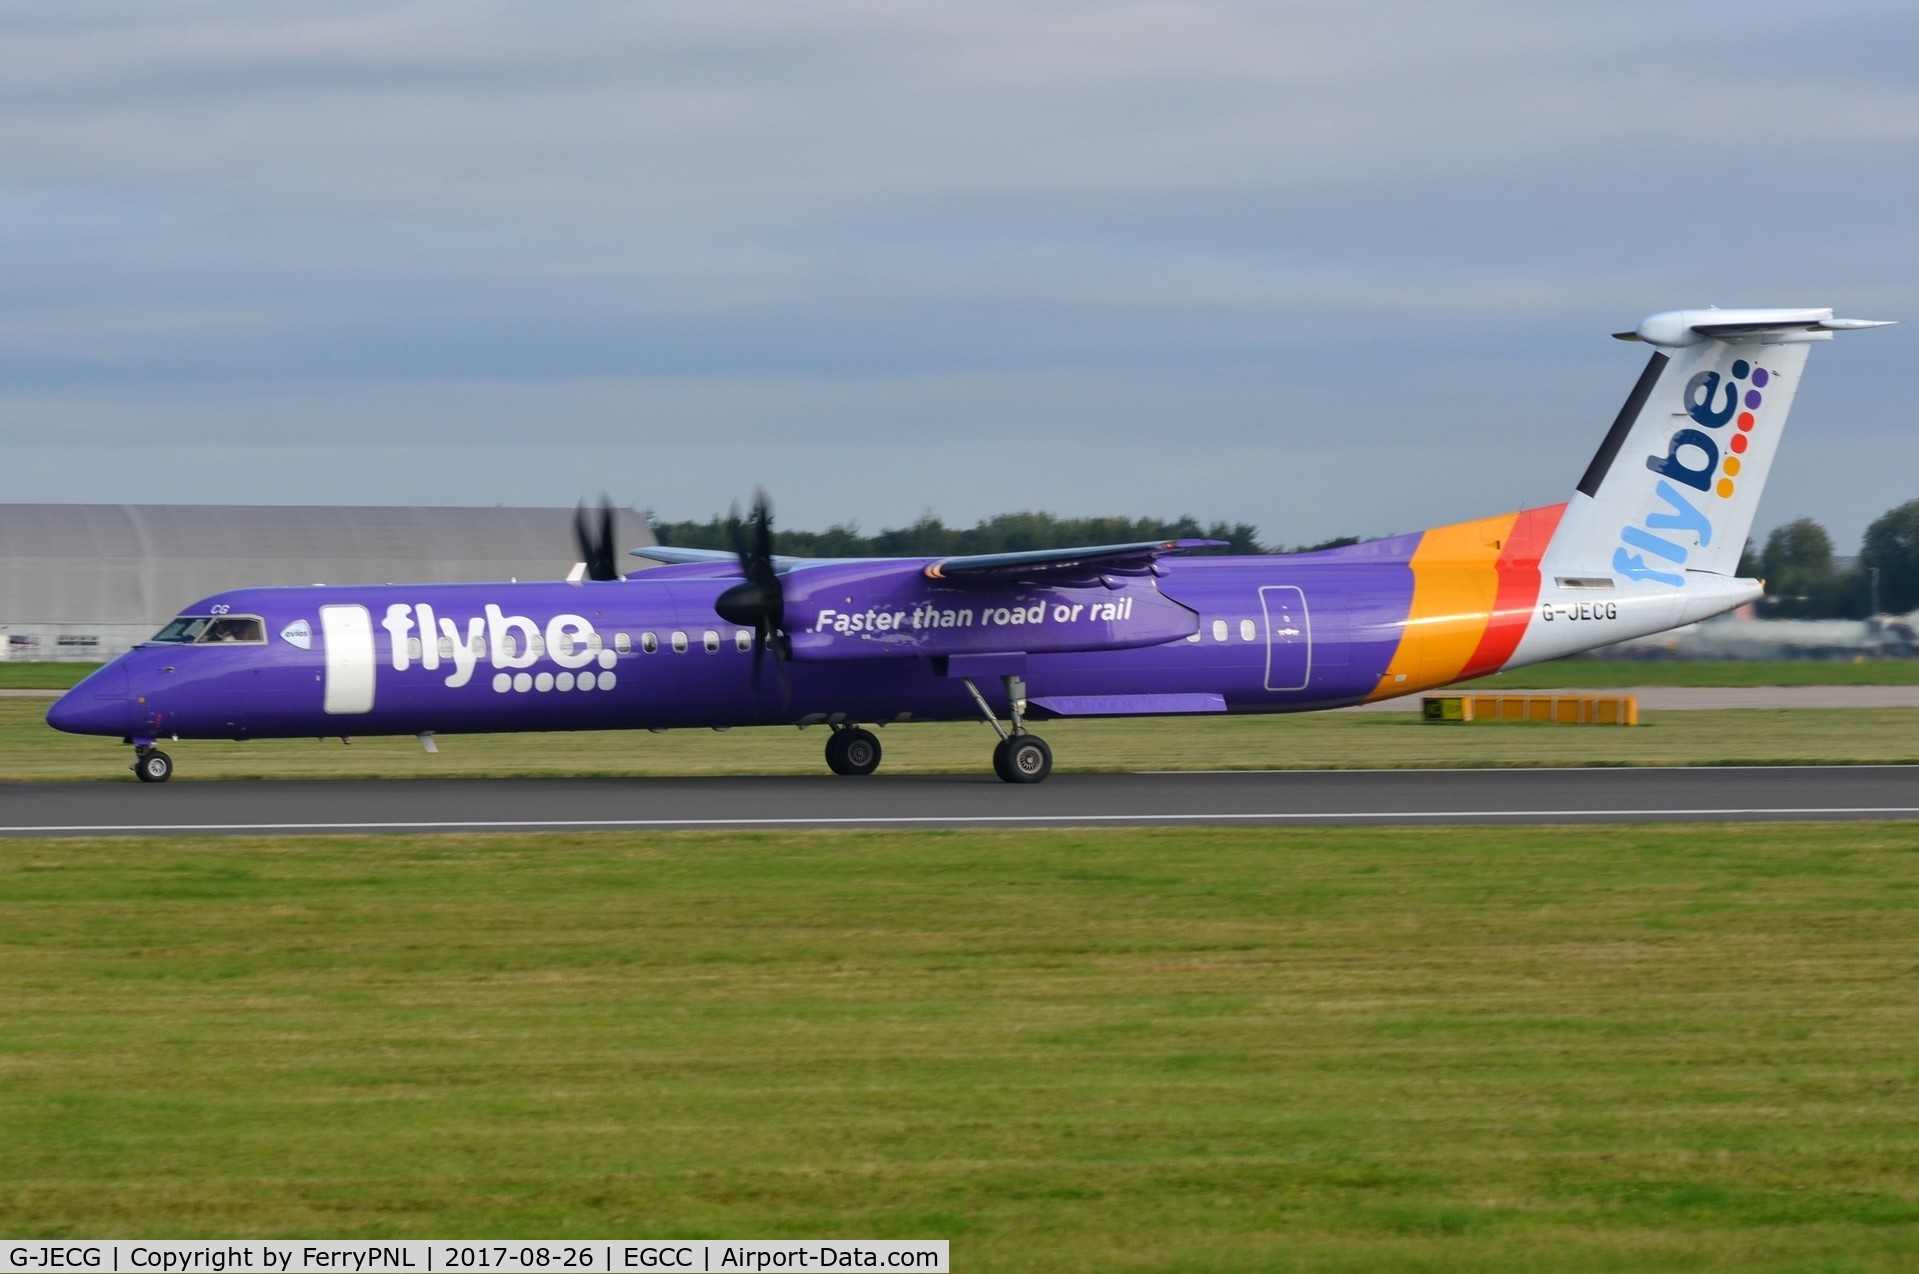 G-JECG, 2004 De Havilland Canada DHC-8-402Q Dash 8 C/N 4098, Flybe DHC8 appears to have a new door fitted.